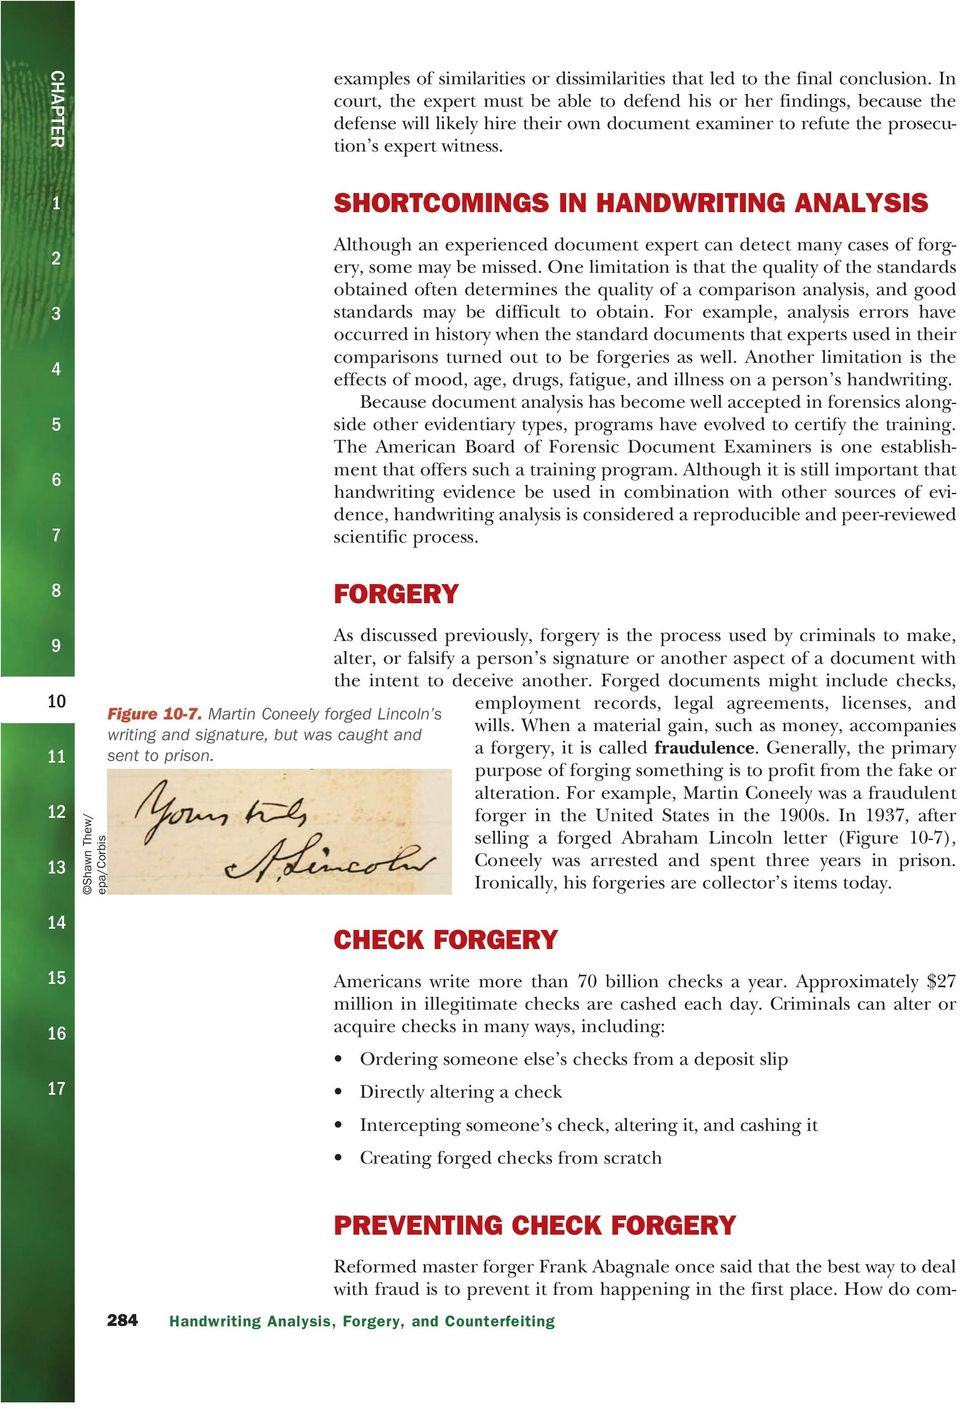 Handwriting Analysis Forgery And Counterfeiting  Pdf